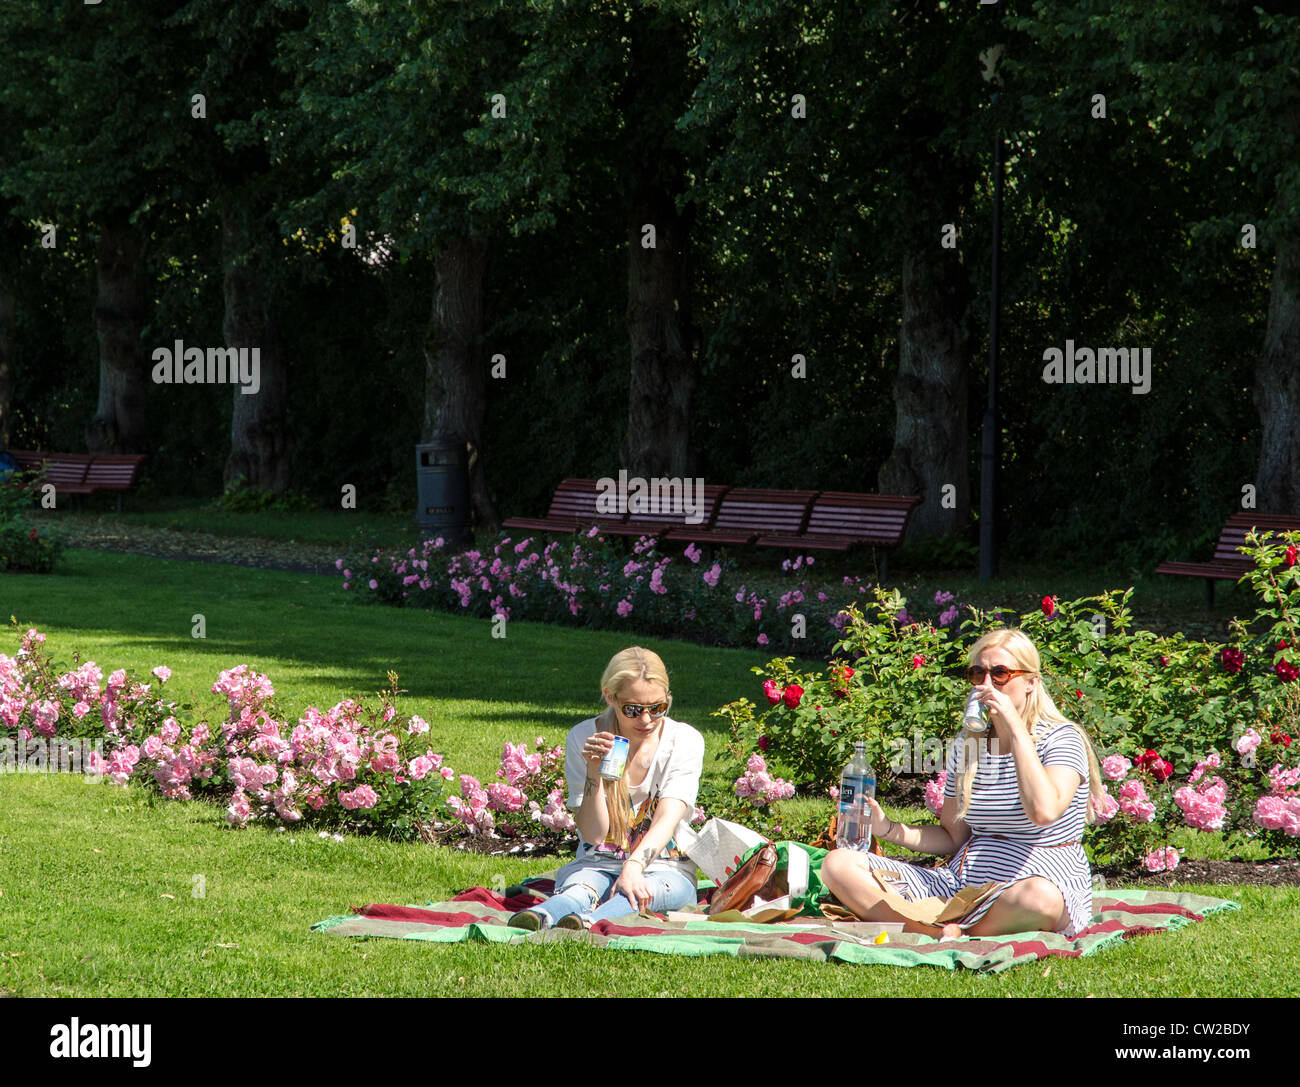 Young Norwegian blond girls having a picnic at Frogner Park Oslo Norway Scandinavia Stock Photo